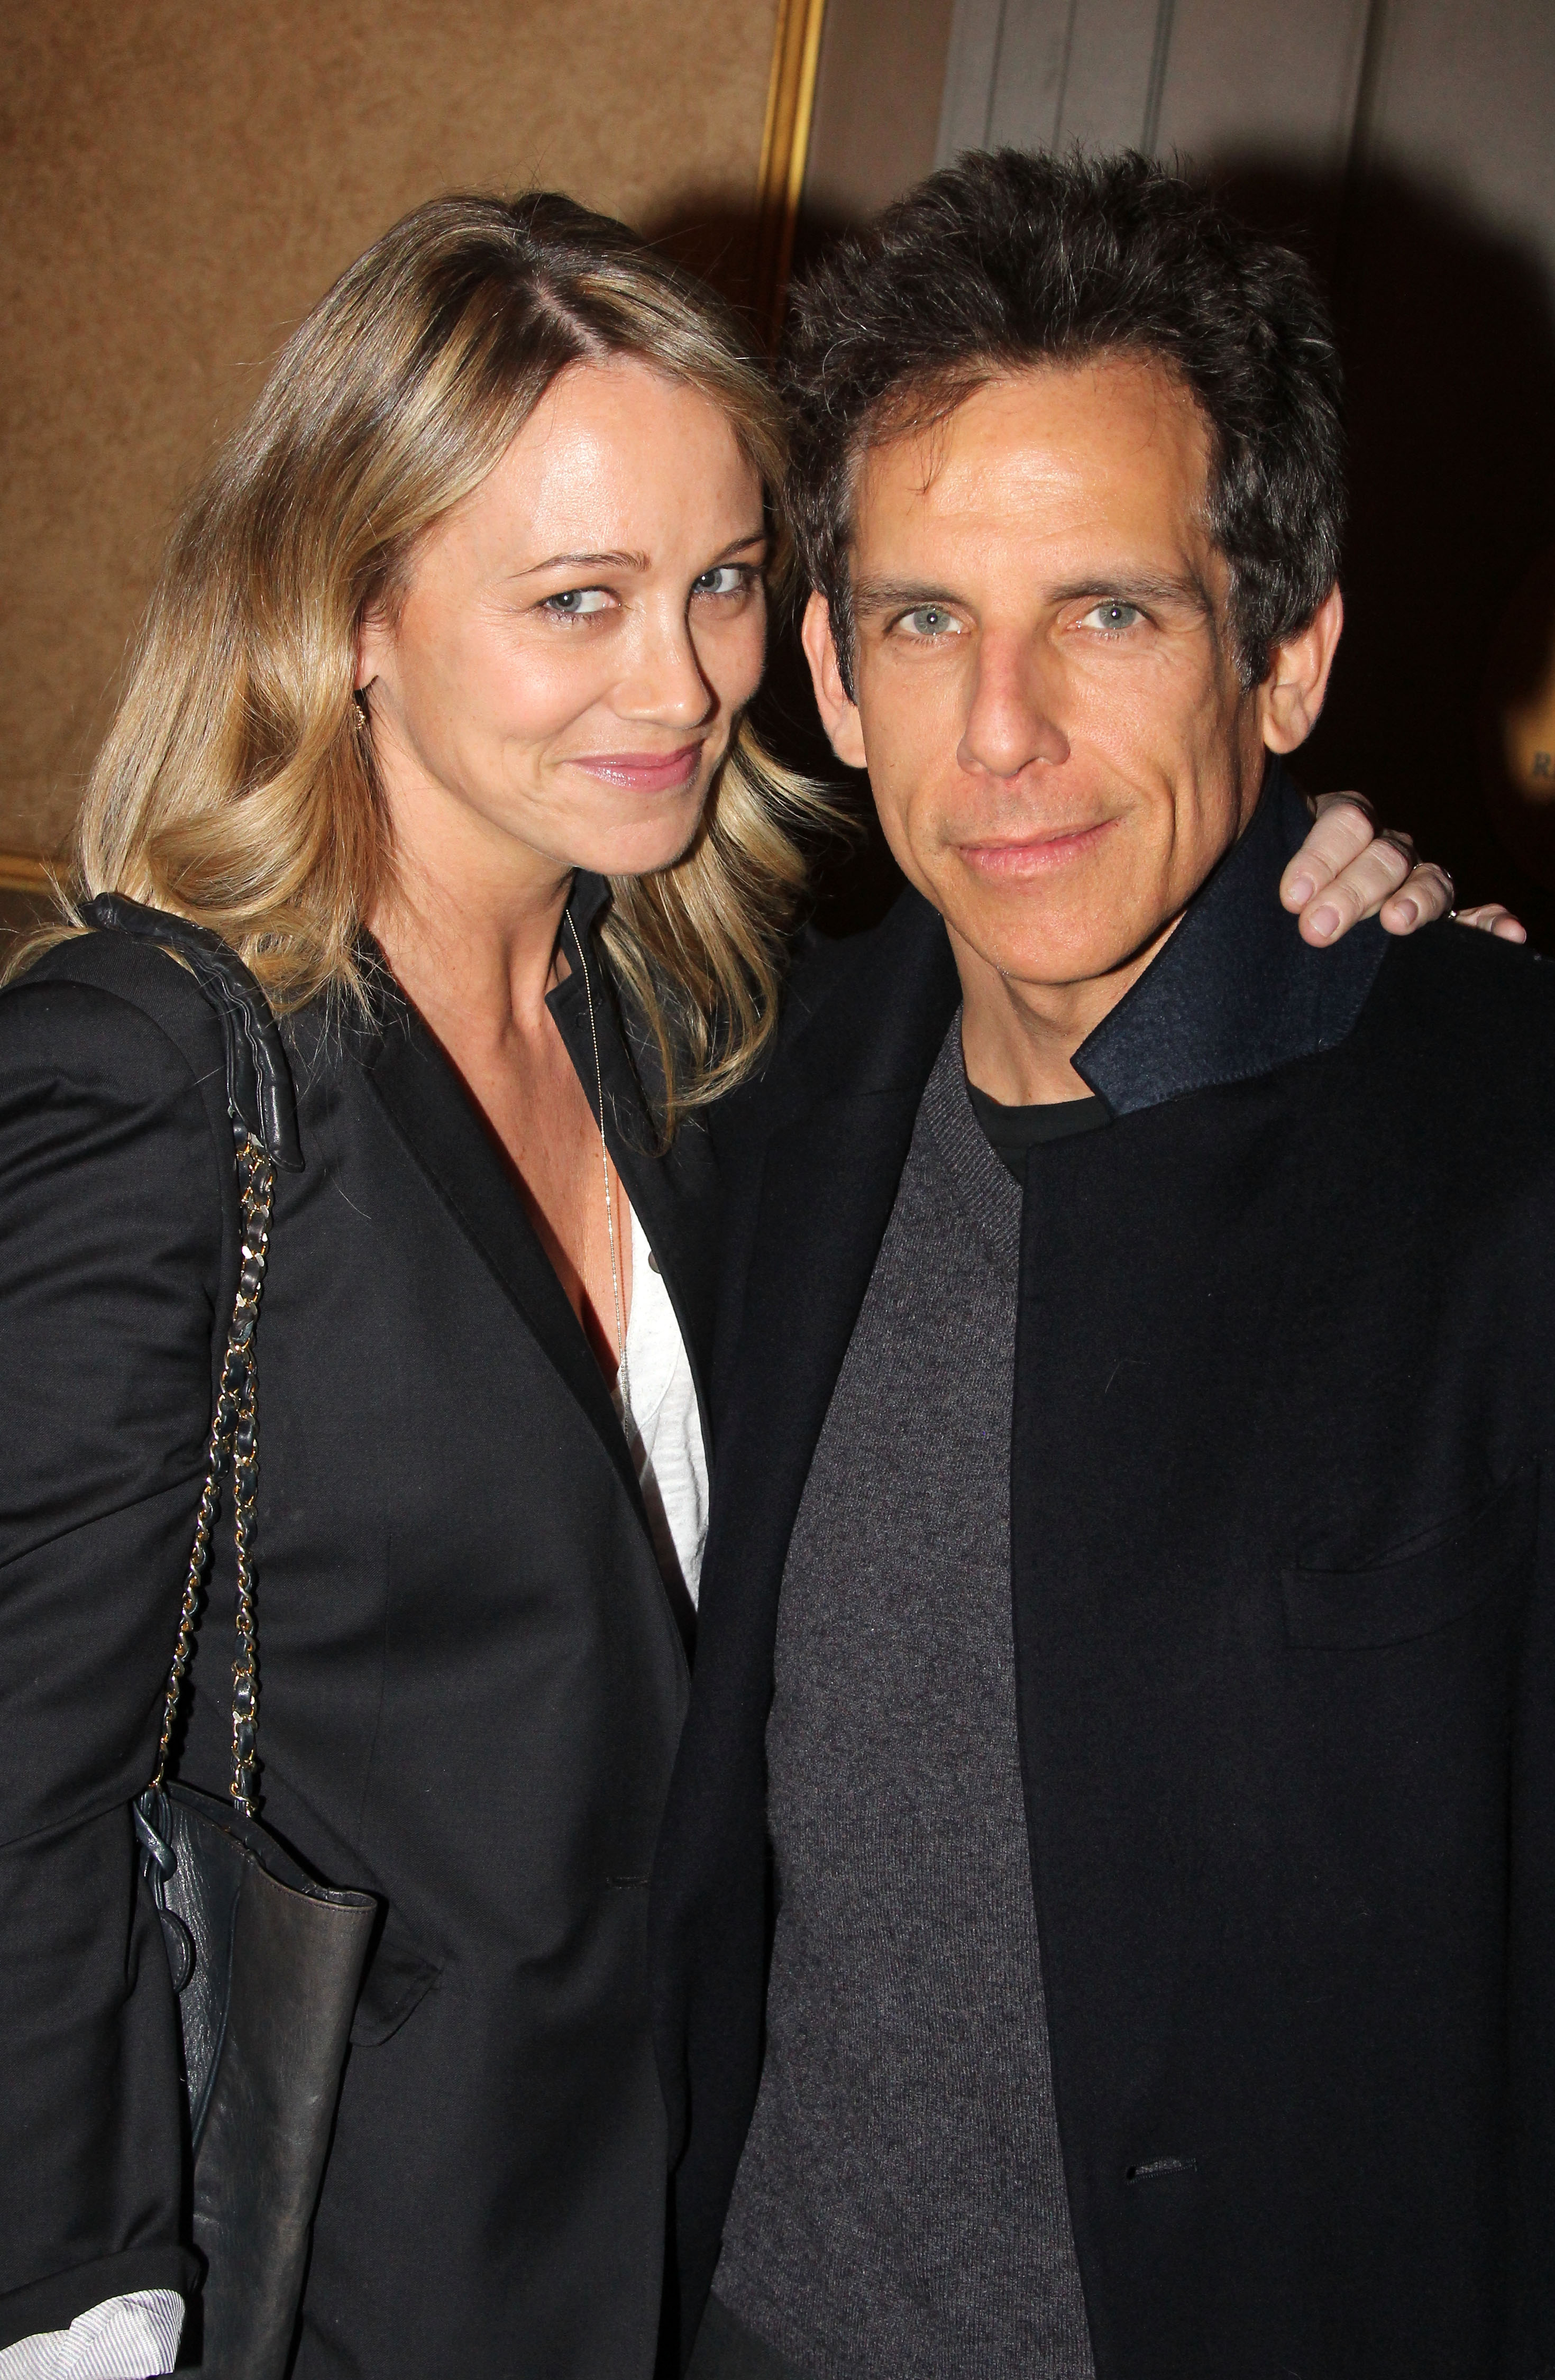 Christine Taylor and husband Ben Stiller on March 22, 2015 in New York City. | Source: Getty Images